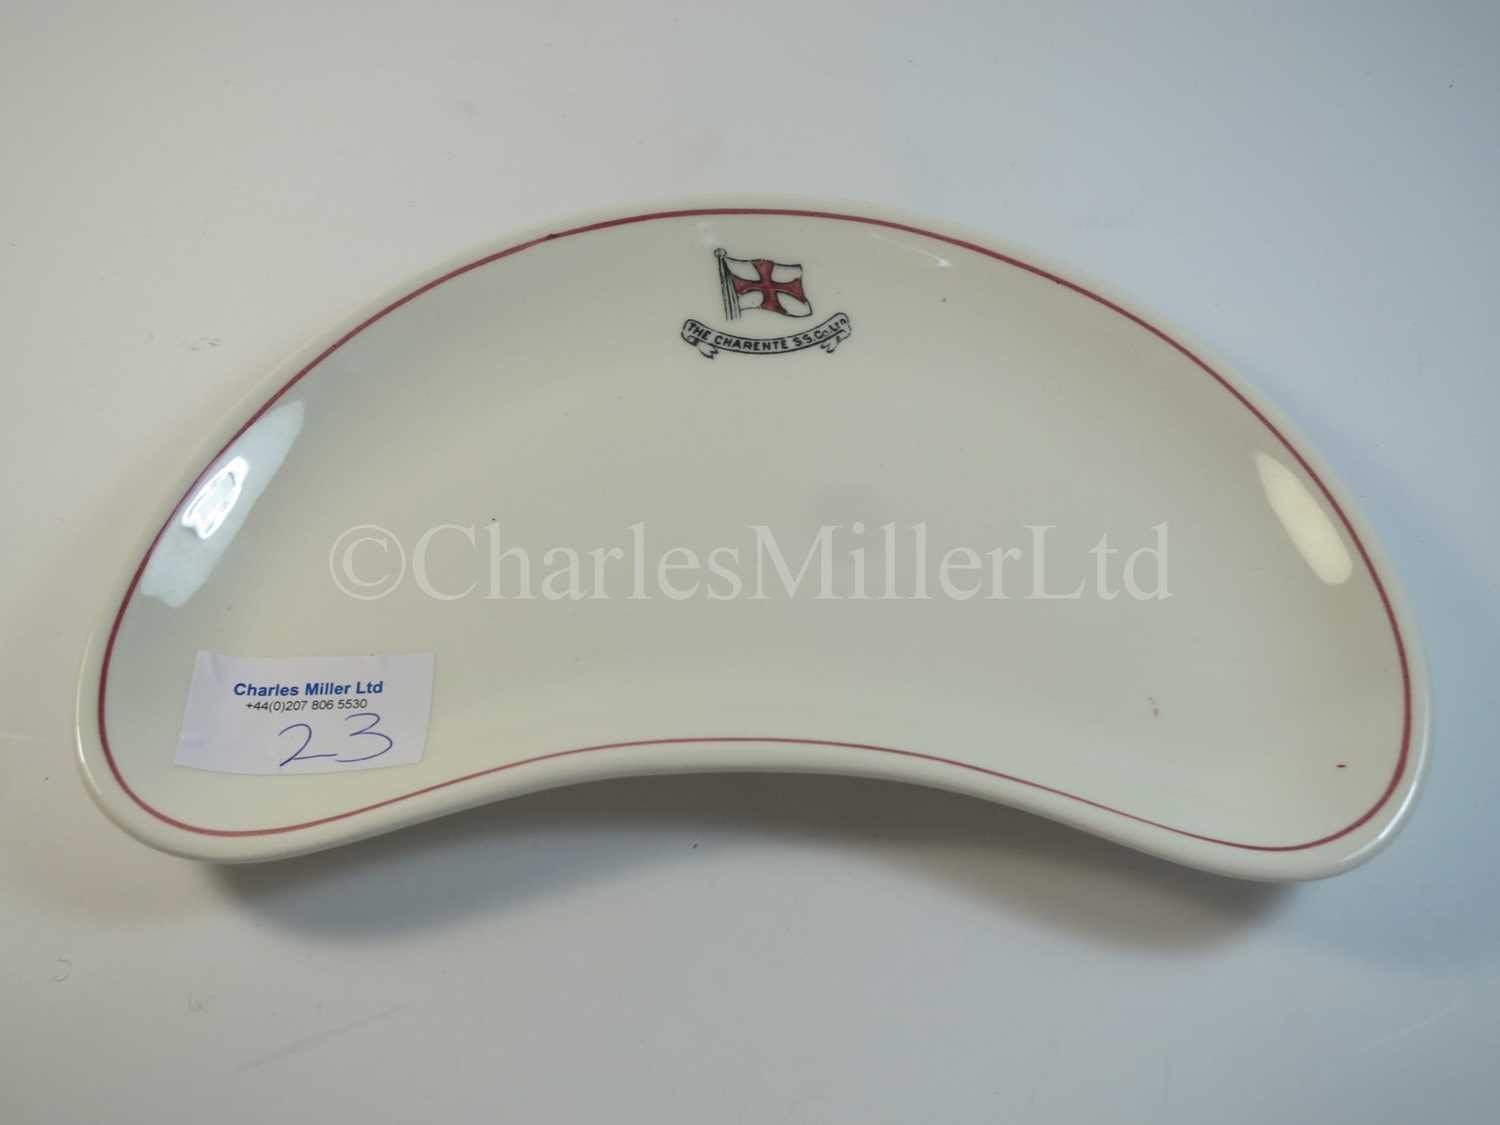 Lot 23 - A Charente Steam Ship Company crescent side plate -- 8in. (20.3cm.) at the widest point